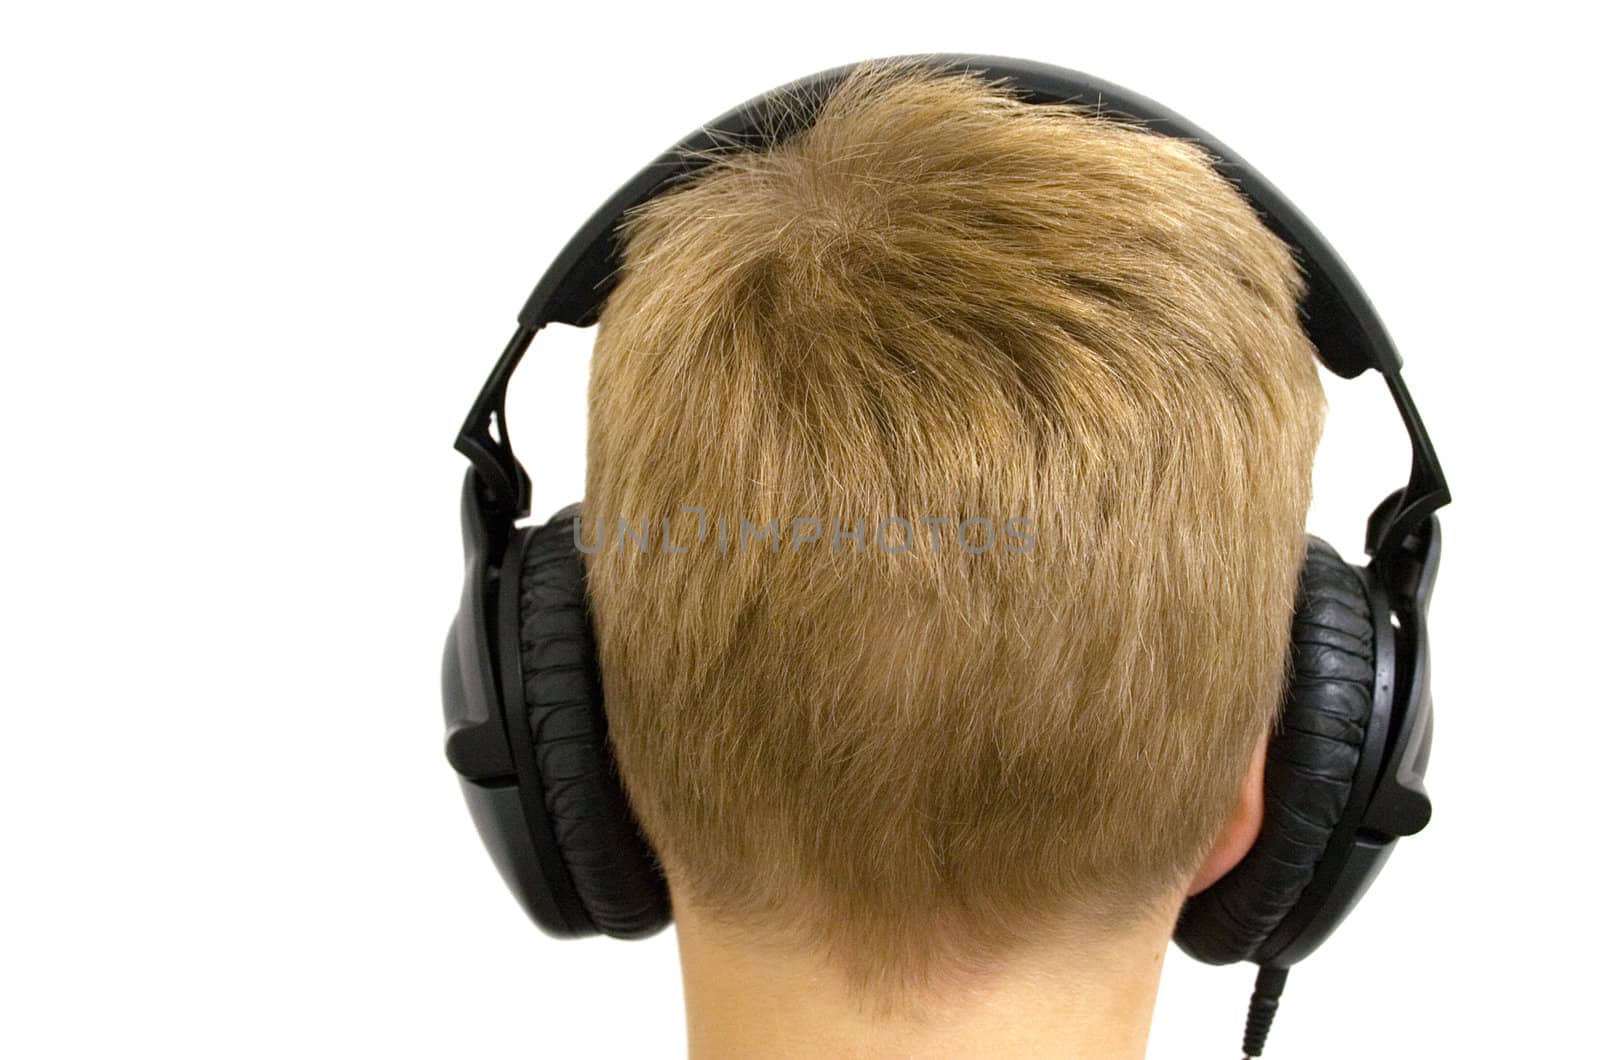 Young boy wearing headphones. Isolated on a white background.